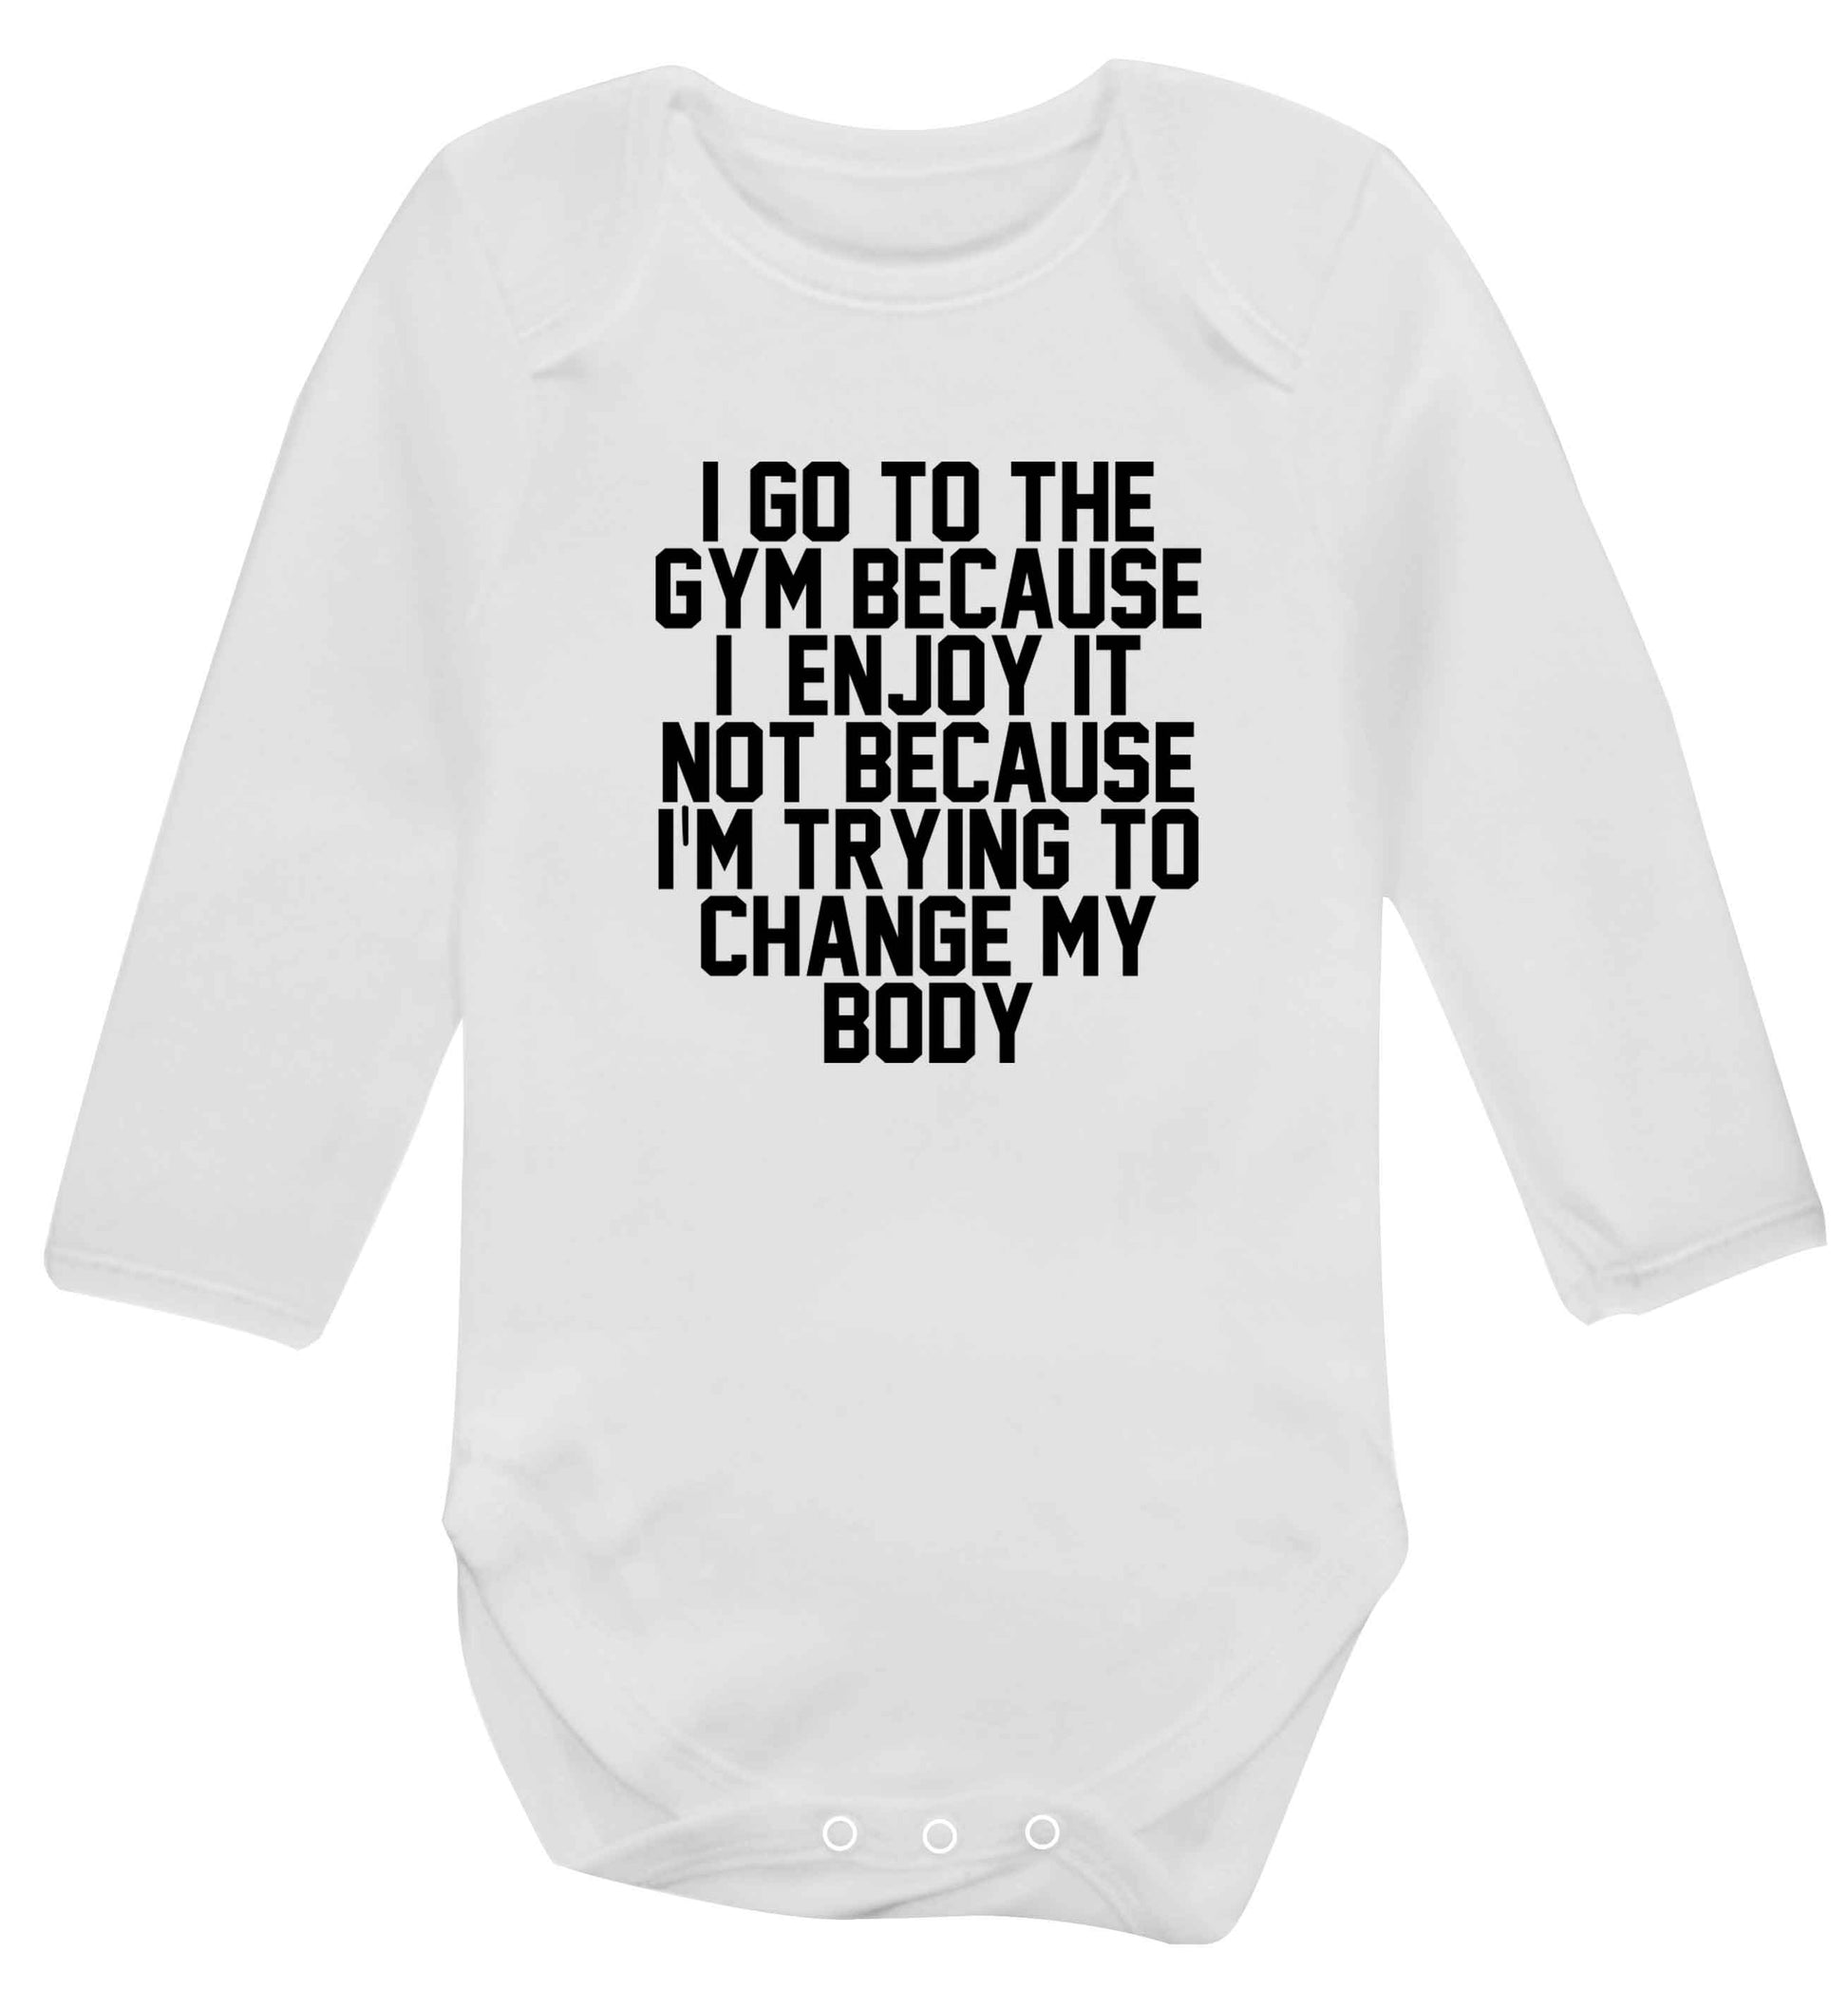 I go to the gym because I enjoy it not because I'm trying to change my body baby vest long sleeved white 6-12 months